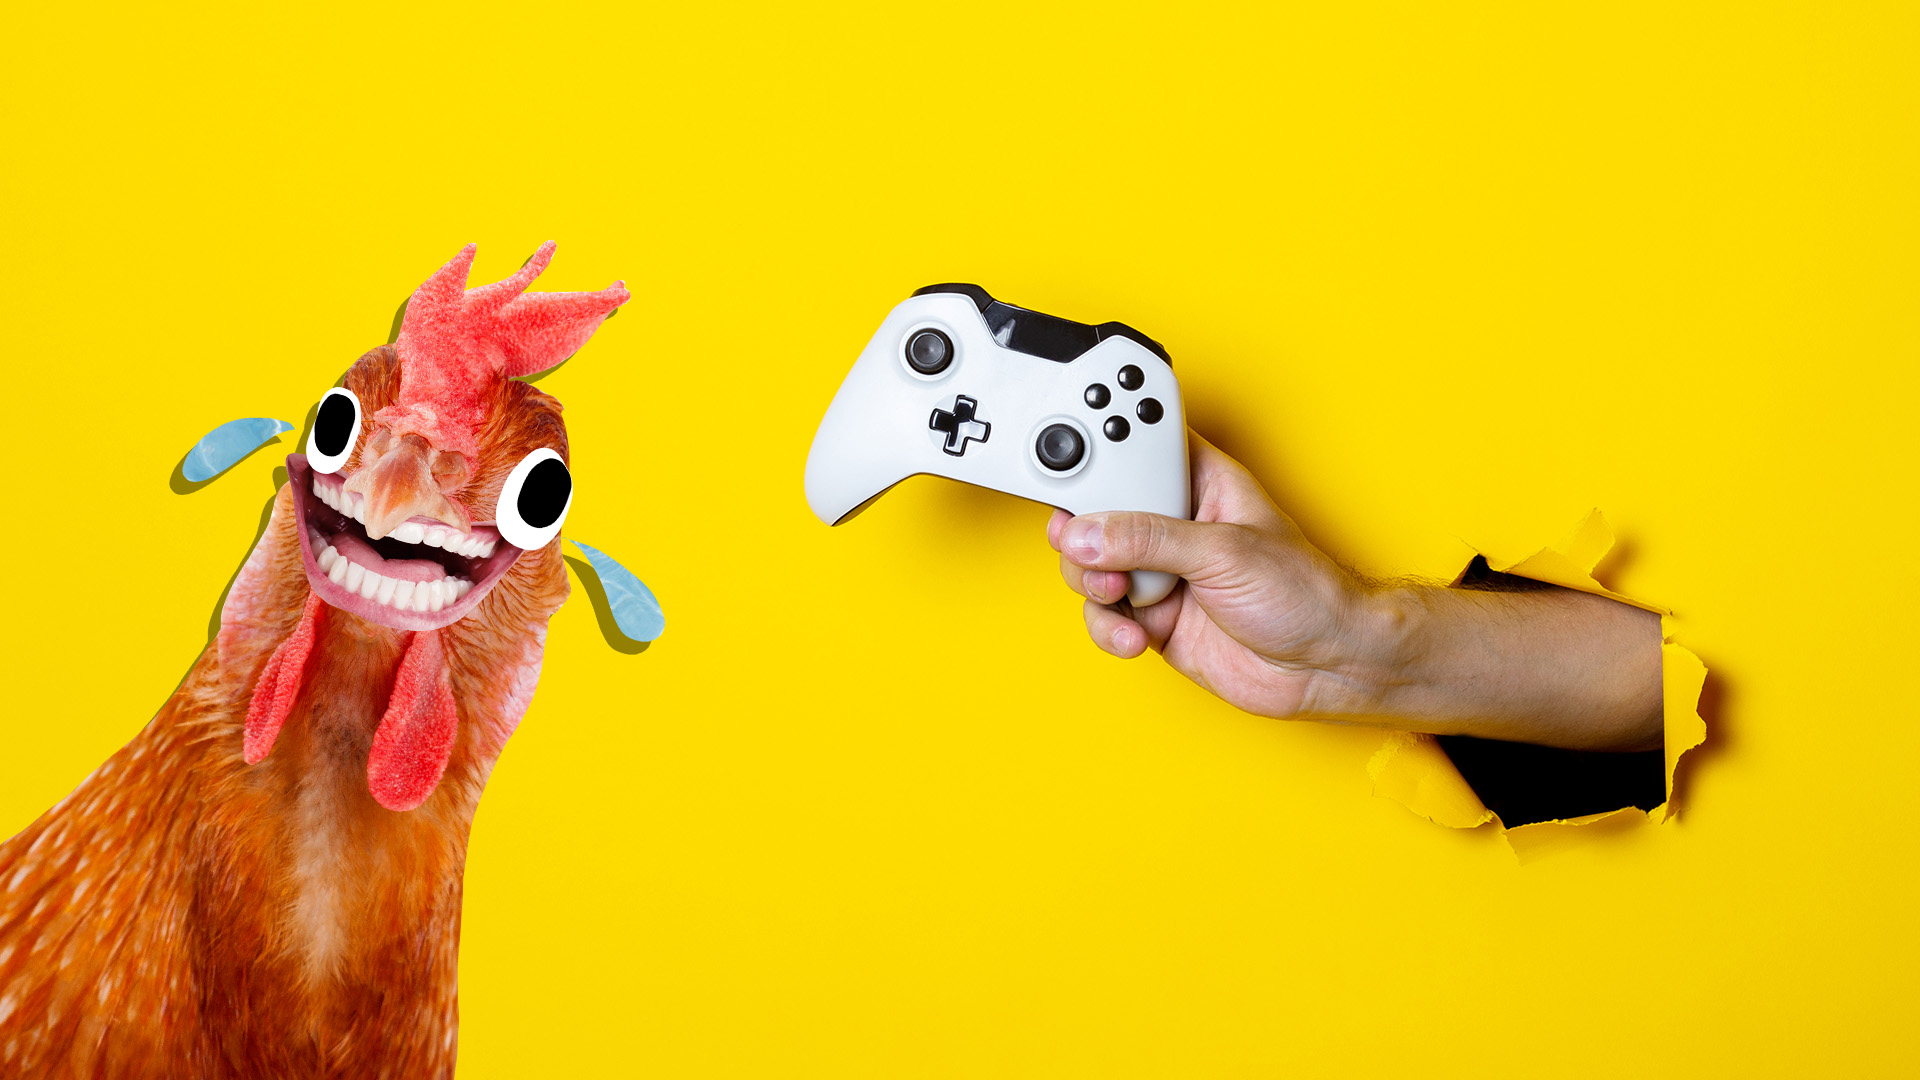 A hand holding a gaming controller next to a laughing chicken 